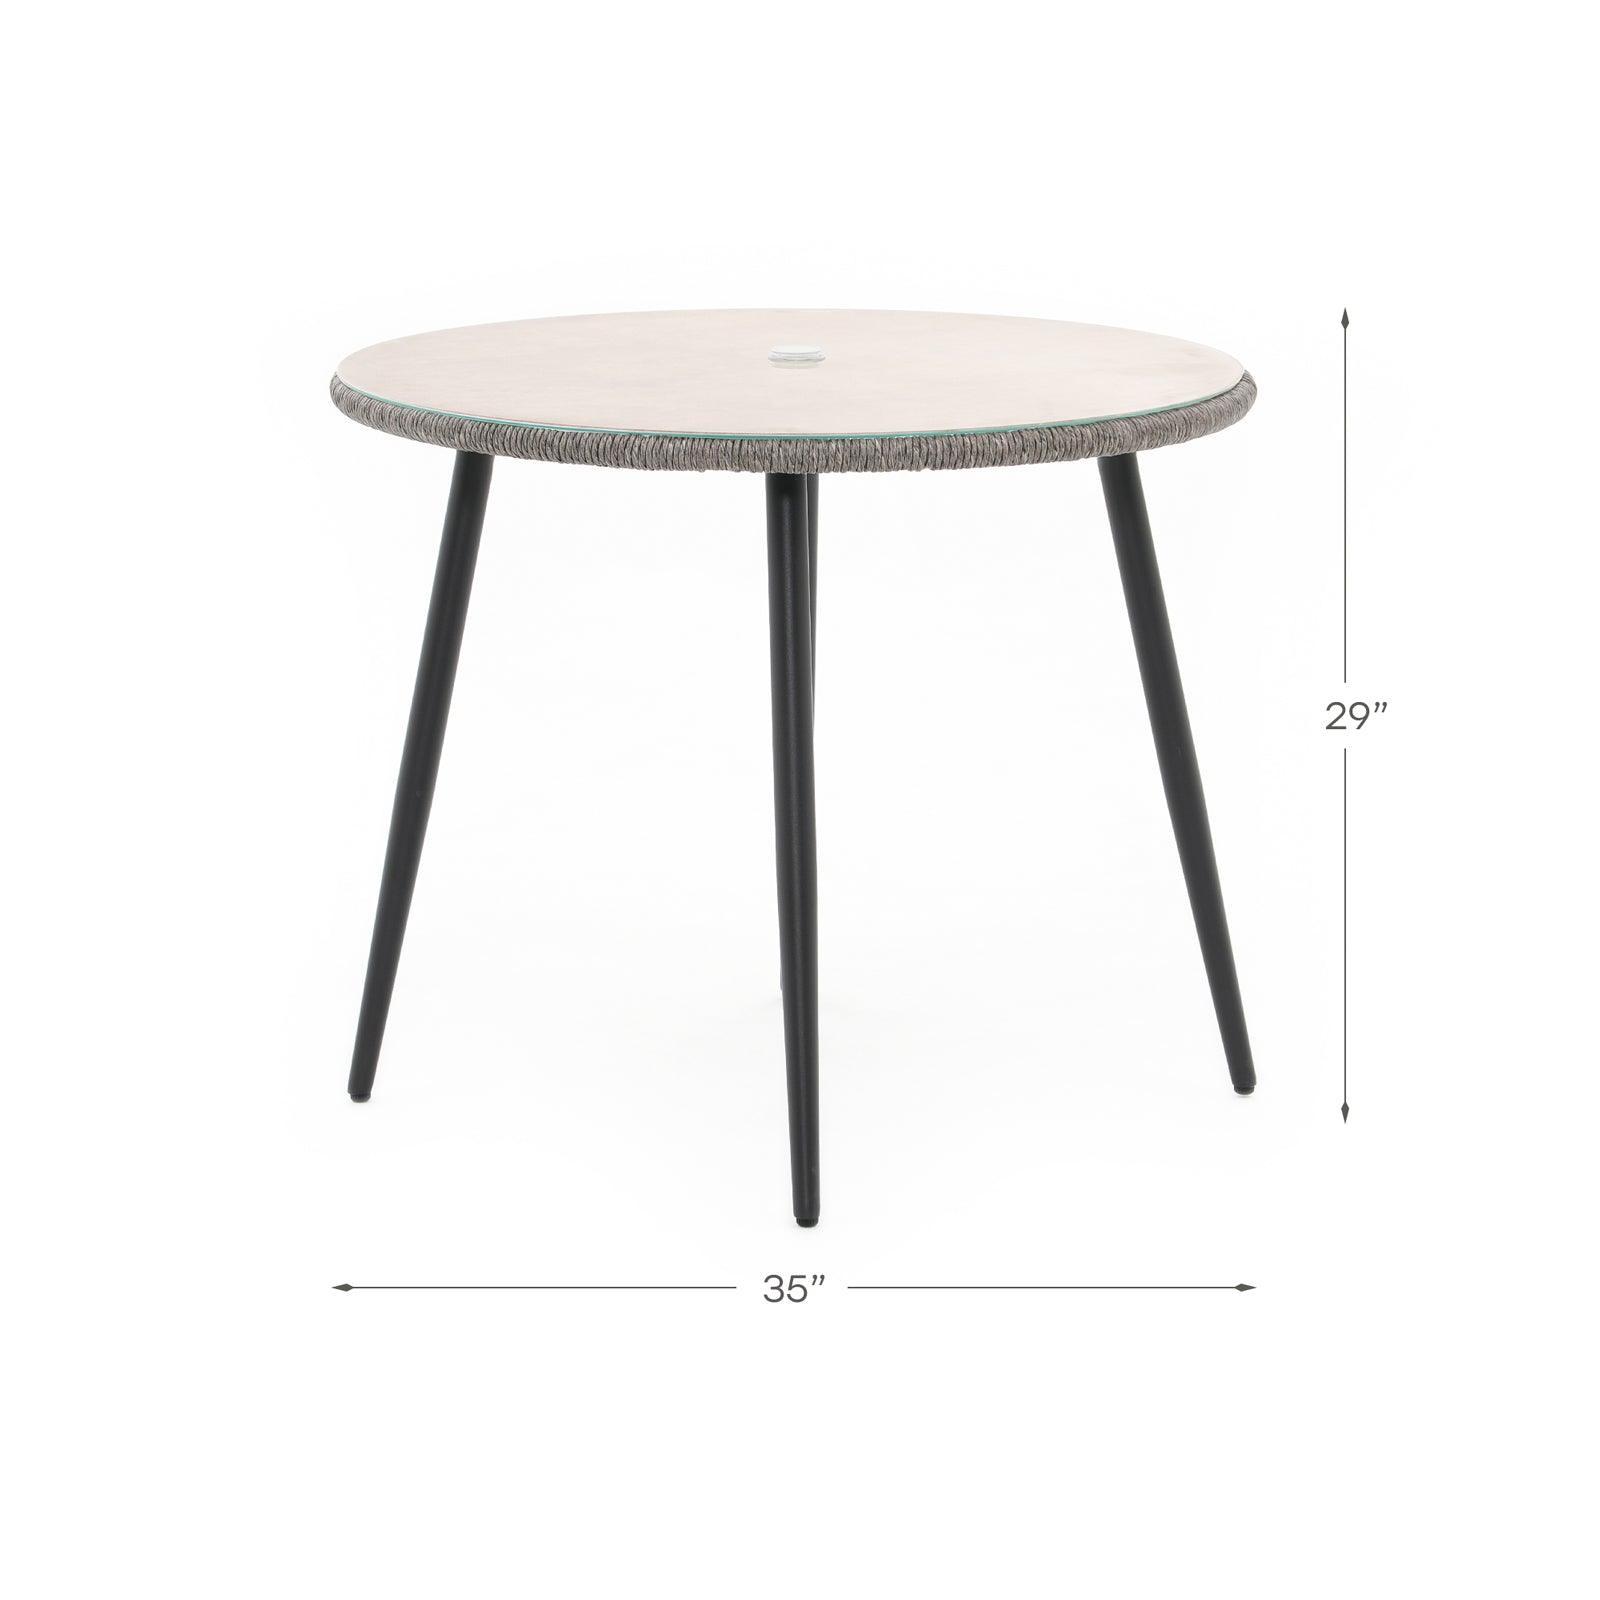 Hallerbos Outdoor Round Dining Table with umbrella hole and steel frame, rattan design, dimension info - Jardina Furniture#Color_Grey